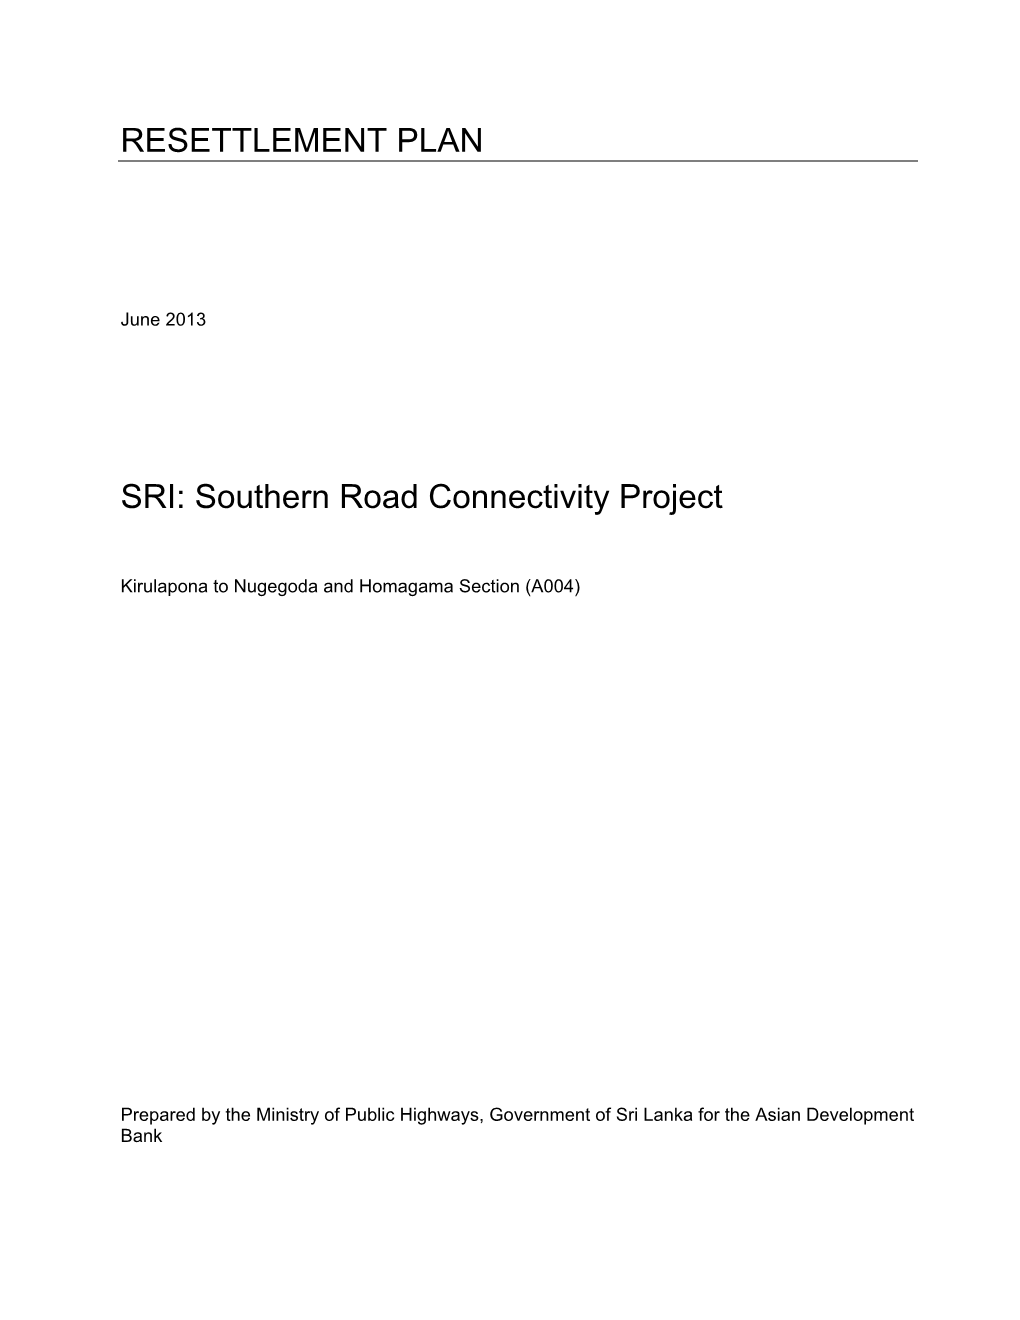 47182-001: Southern Road Connectivity Project